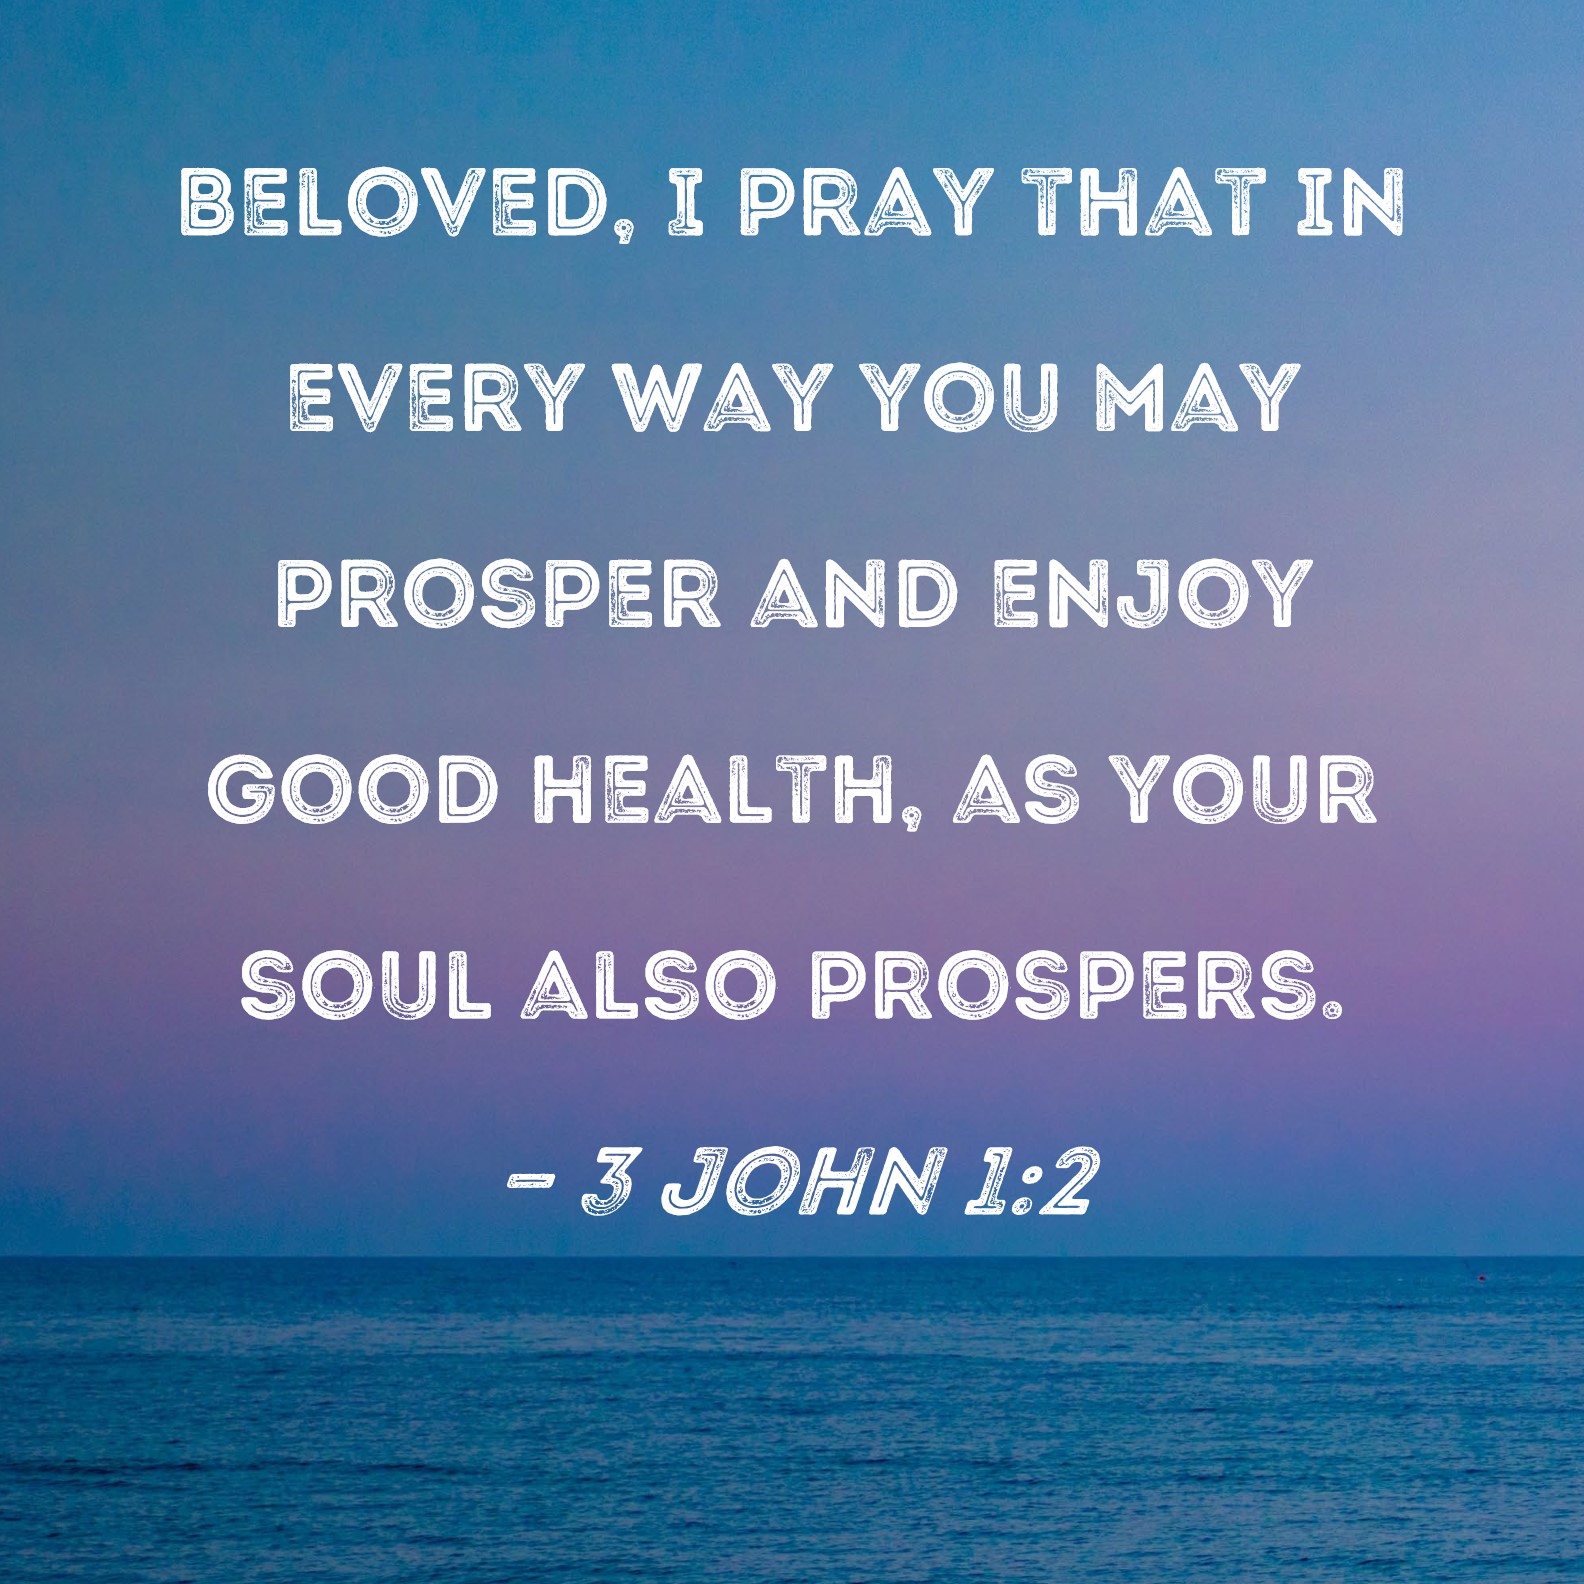 3 John 1:2 Beloved, I pray that in every way you may prosper and enjoy good  health, as your soul also prospers.